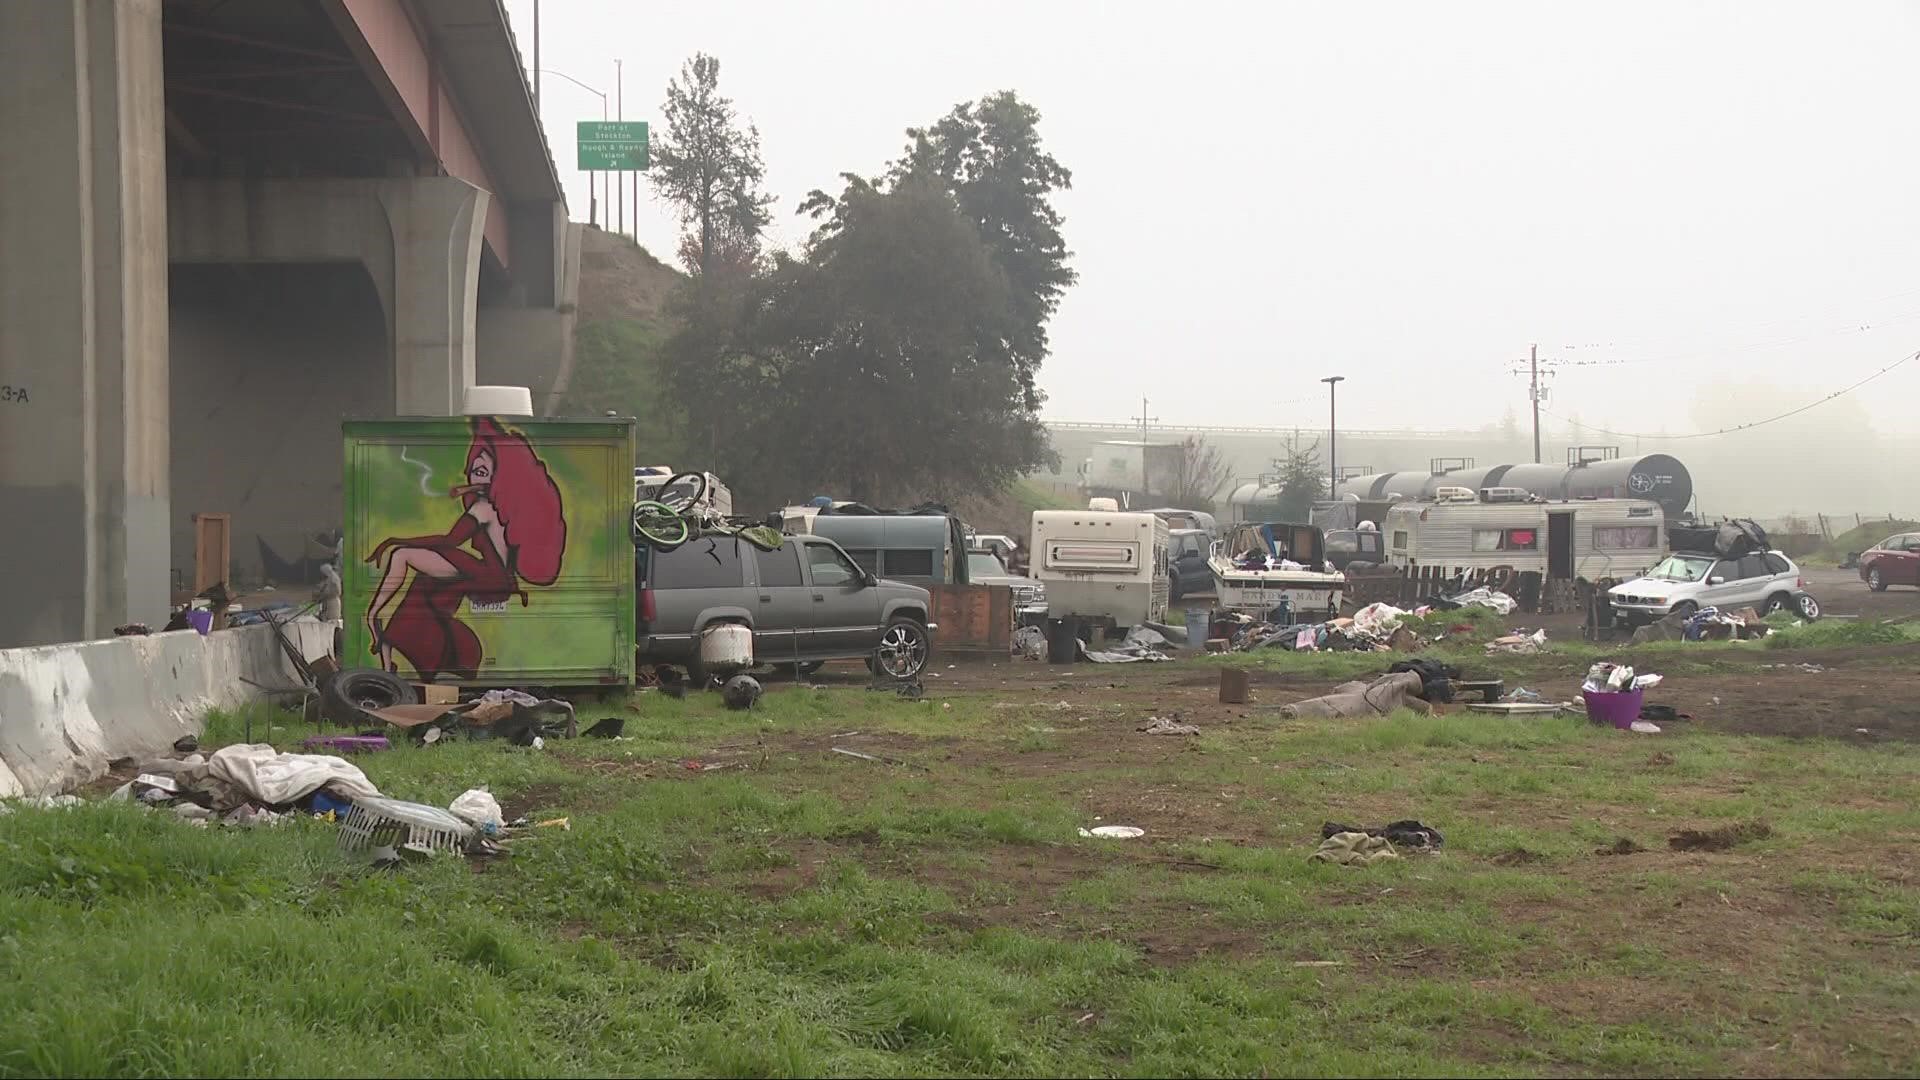 Chief Stanley McFadden is expected to tour homeless encampments on Thursday.